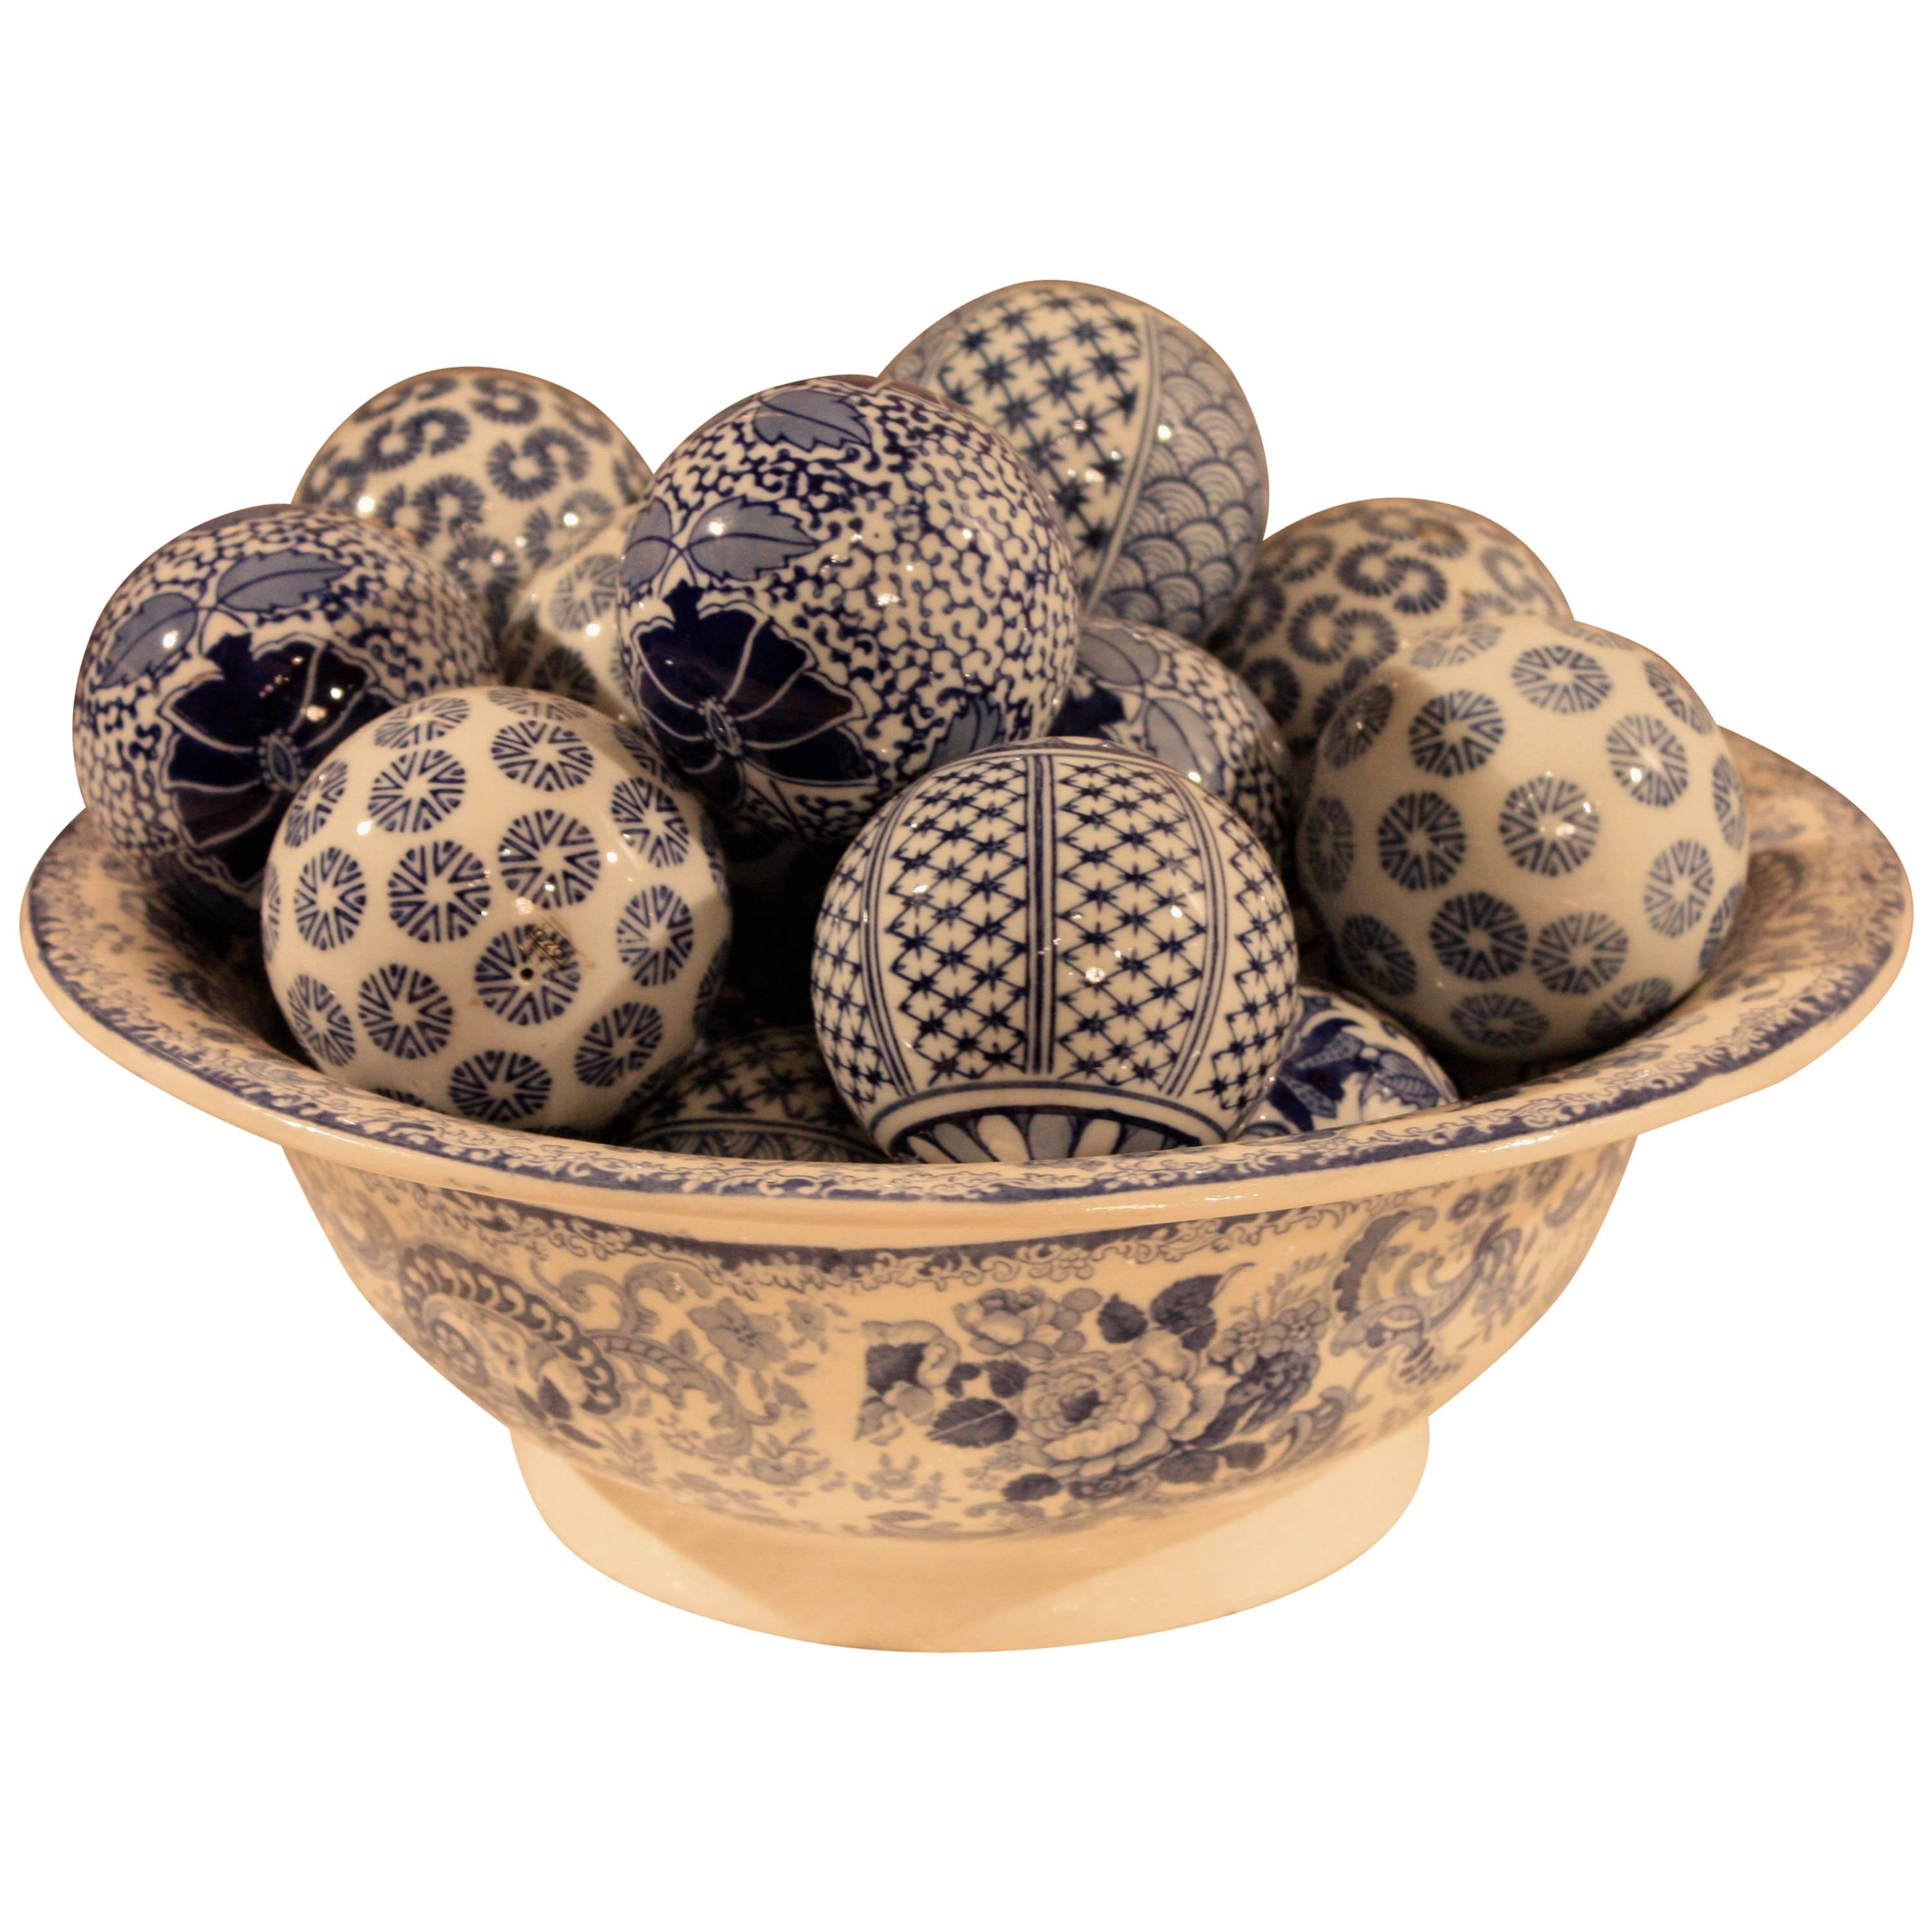 Blue and White Ceramic Bowl with Decorative Balls